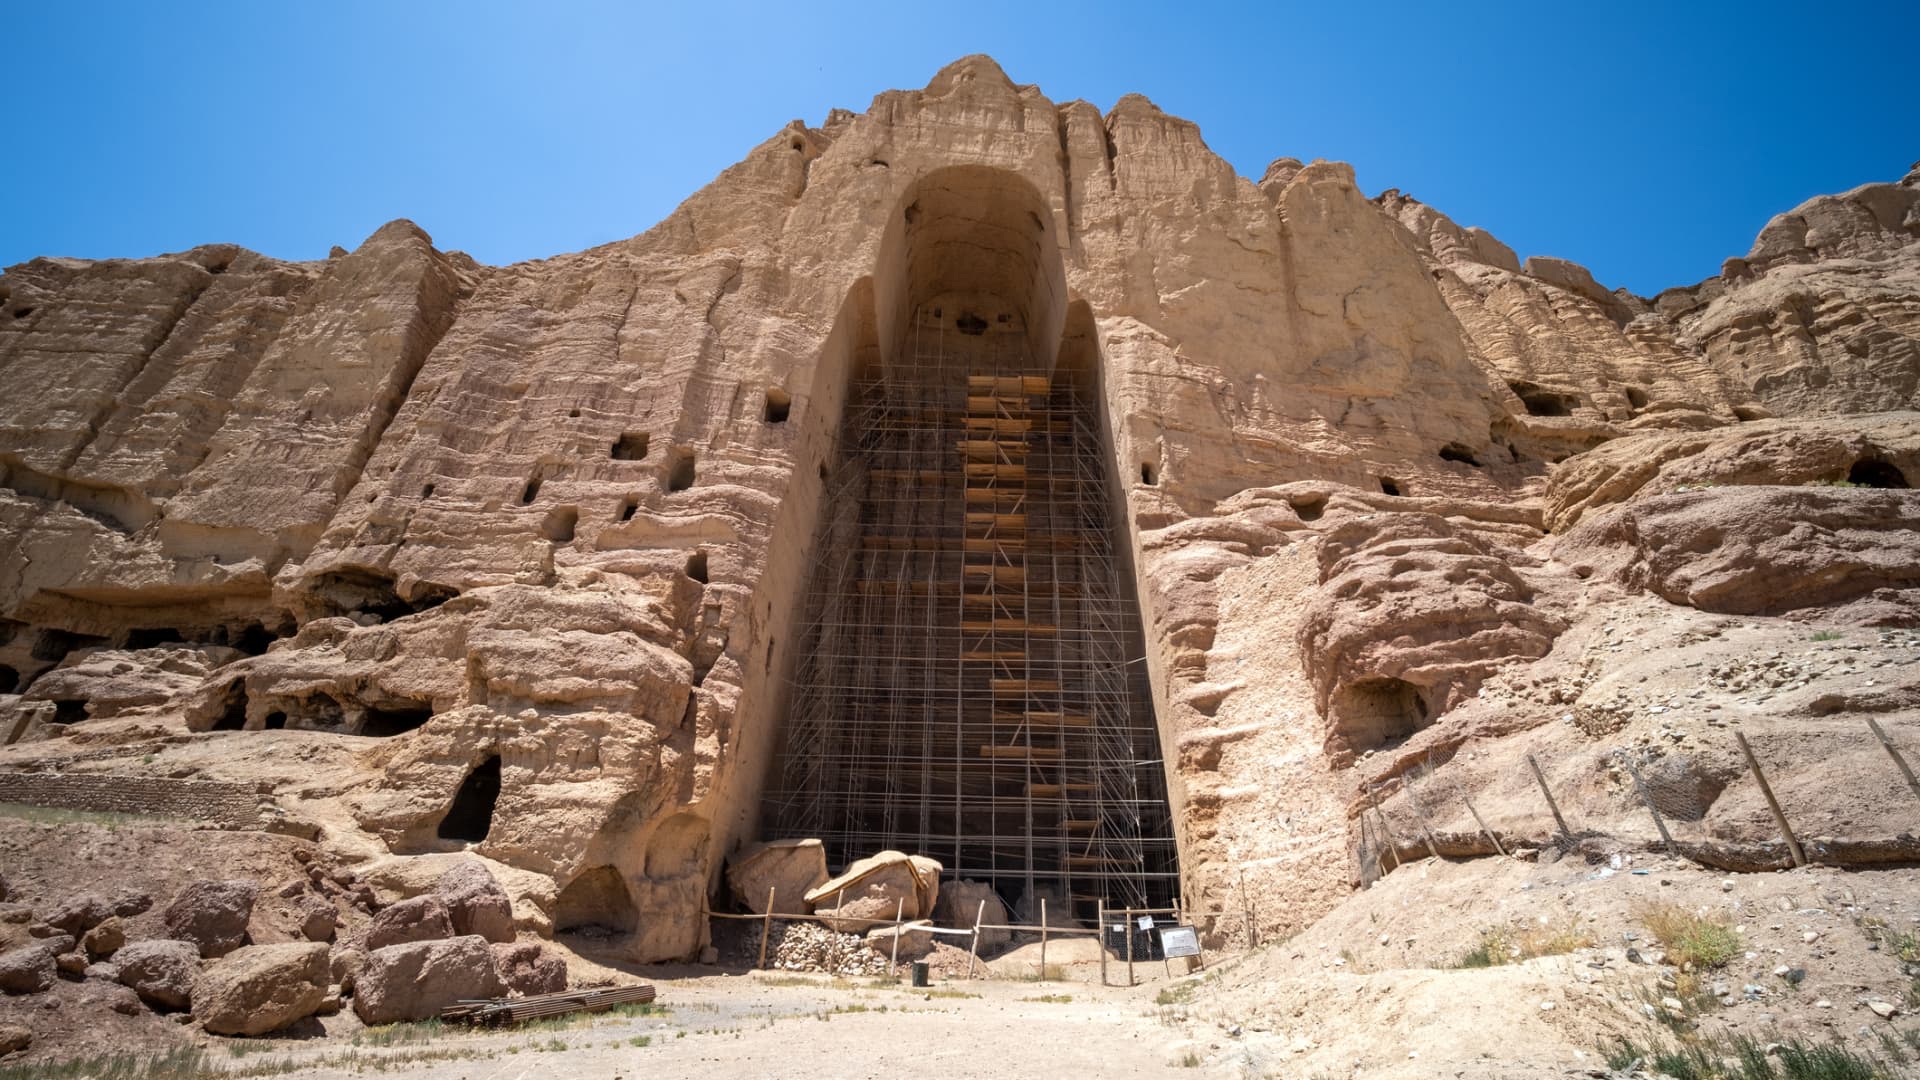 Taliban Selling Tickets To Witness Monuments They've Destroyed Gives A Disturbing Display